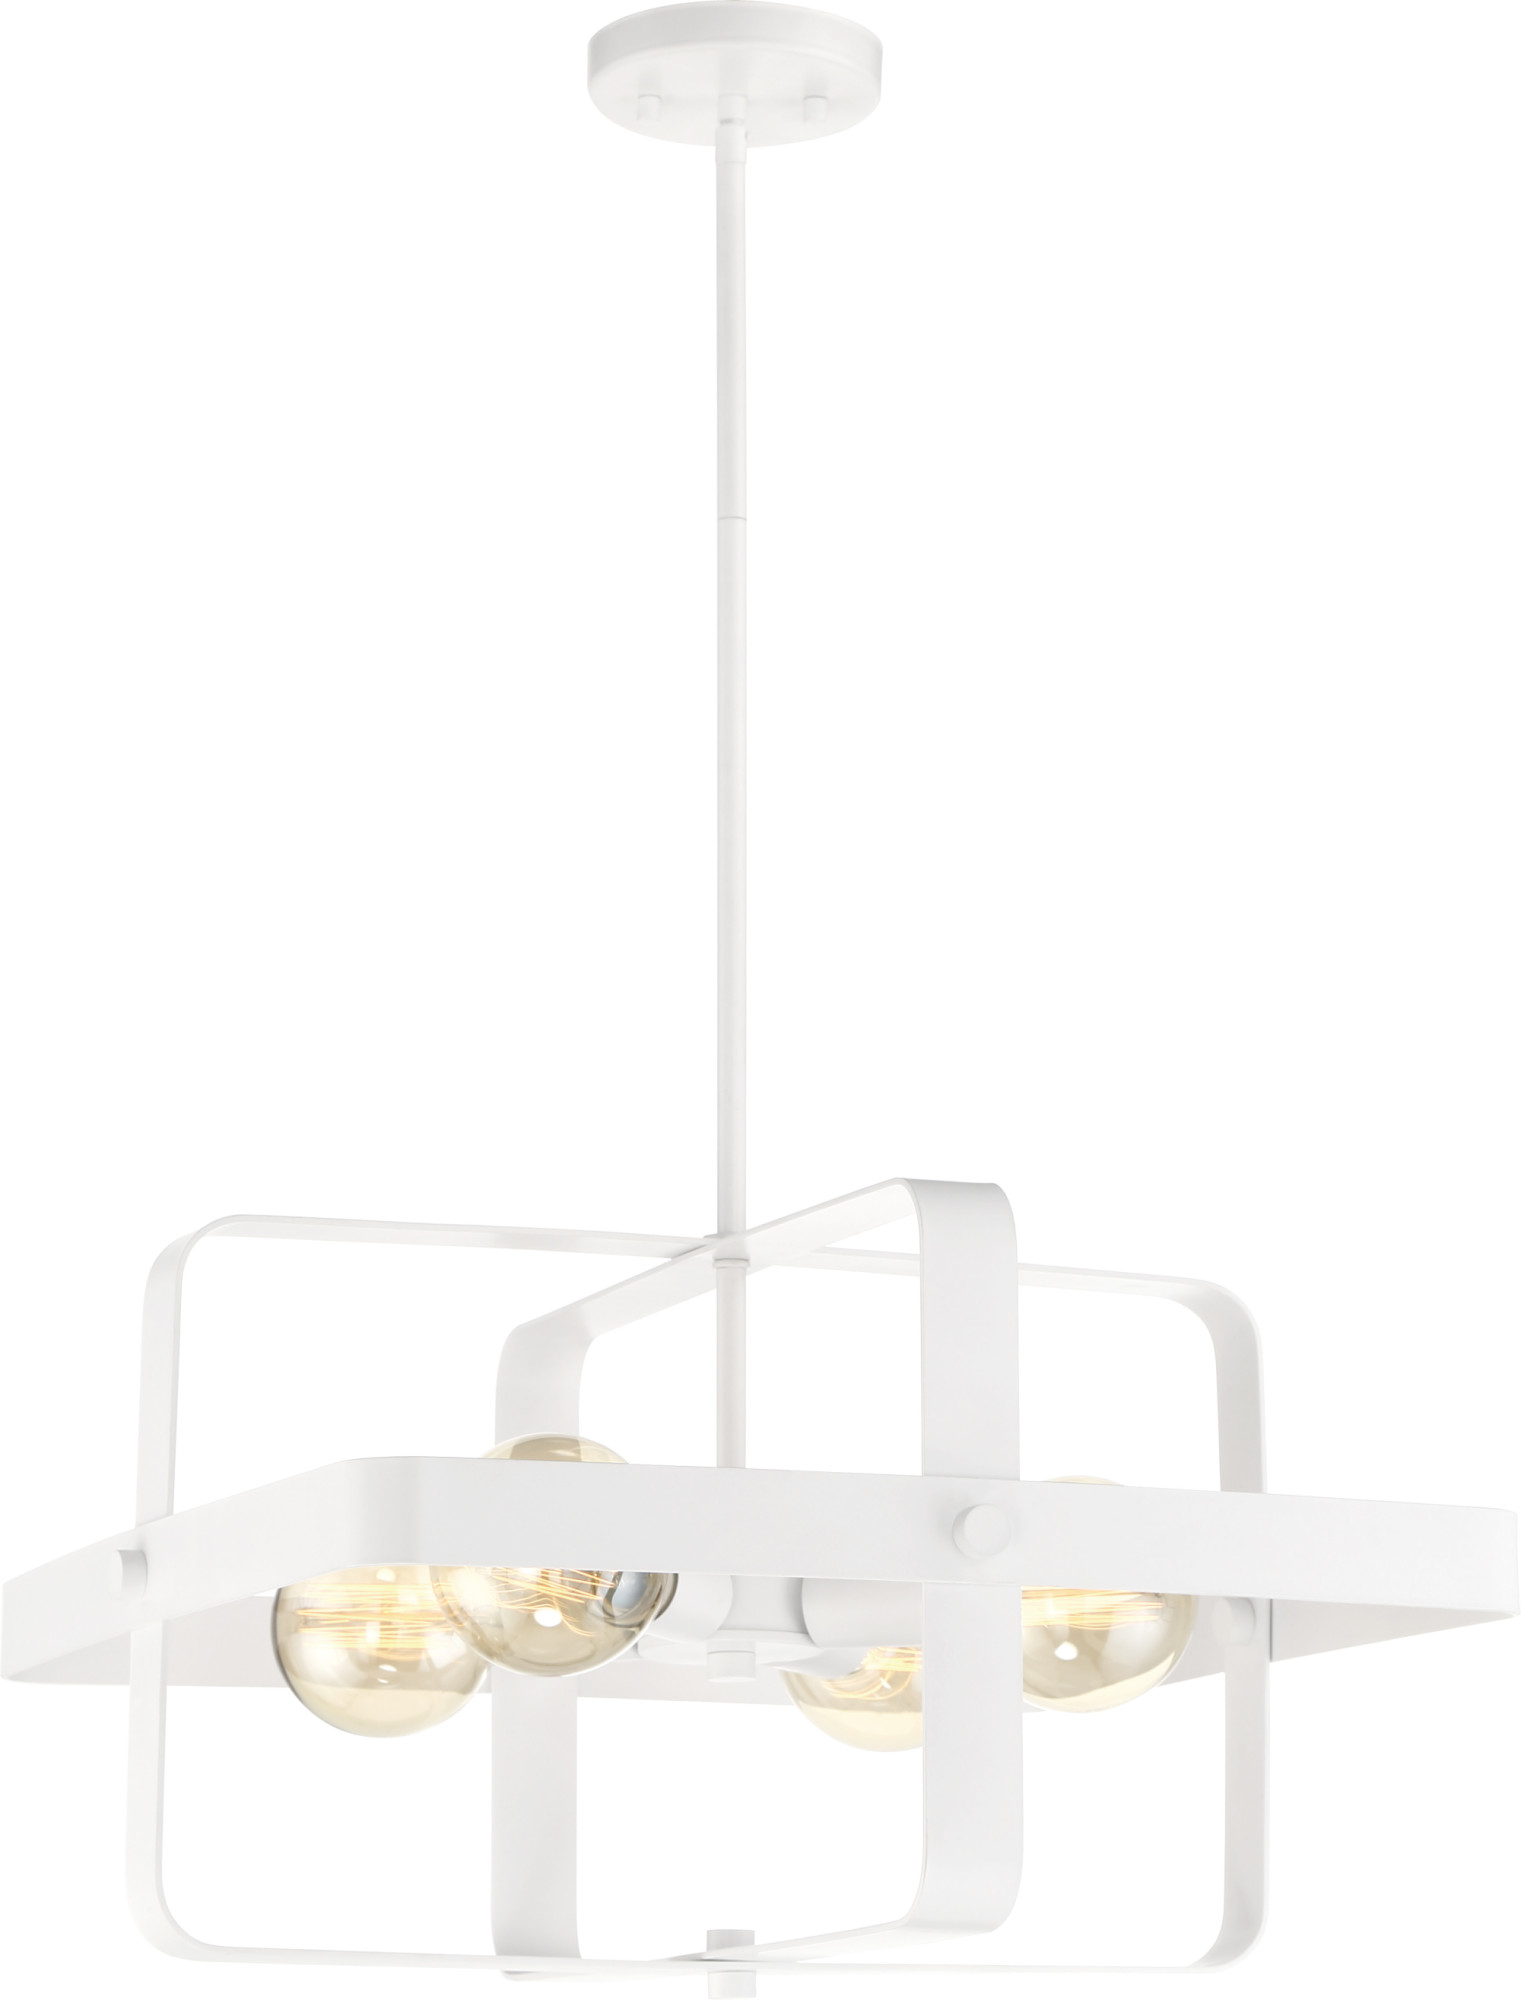 60/6722-Nuvo Lighting-Prana-4 Light Pendant-20 Inches Wide by 12 Inches High-White Finish - image 2 of 7